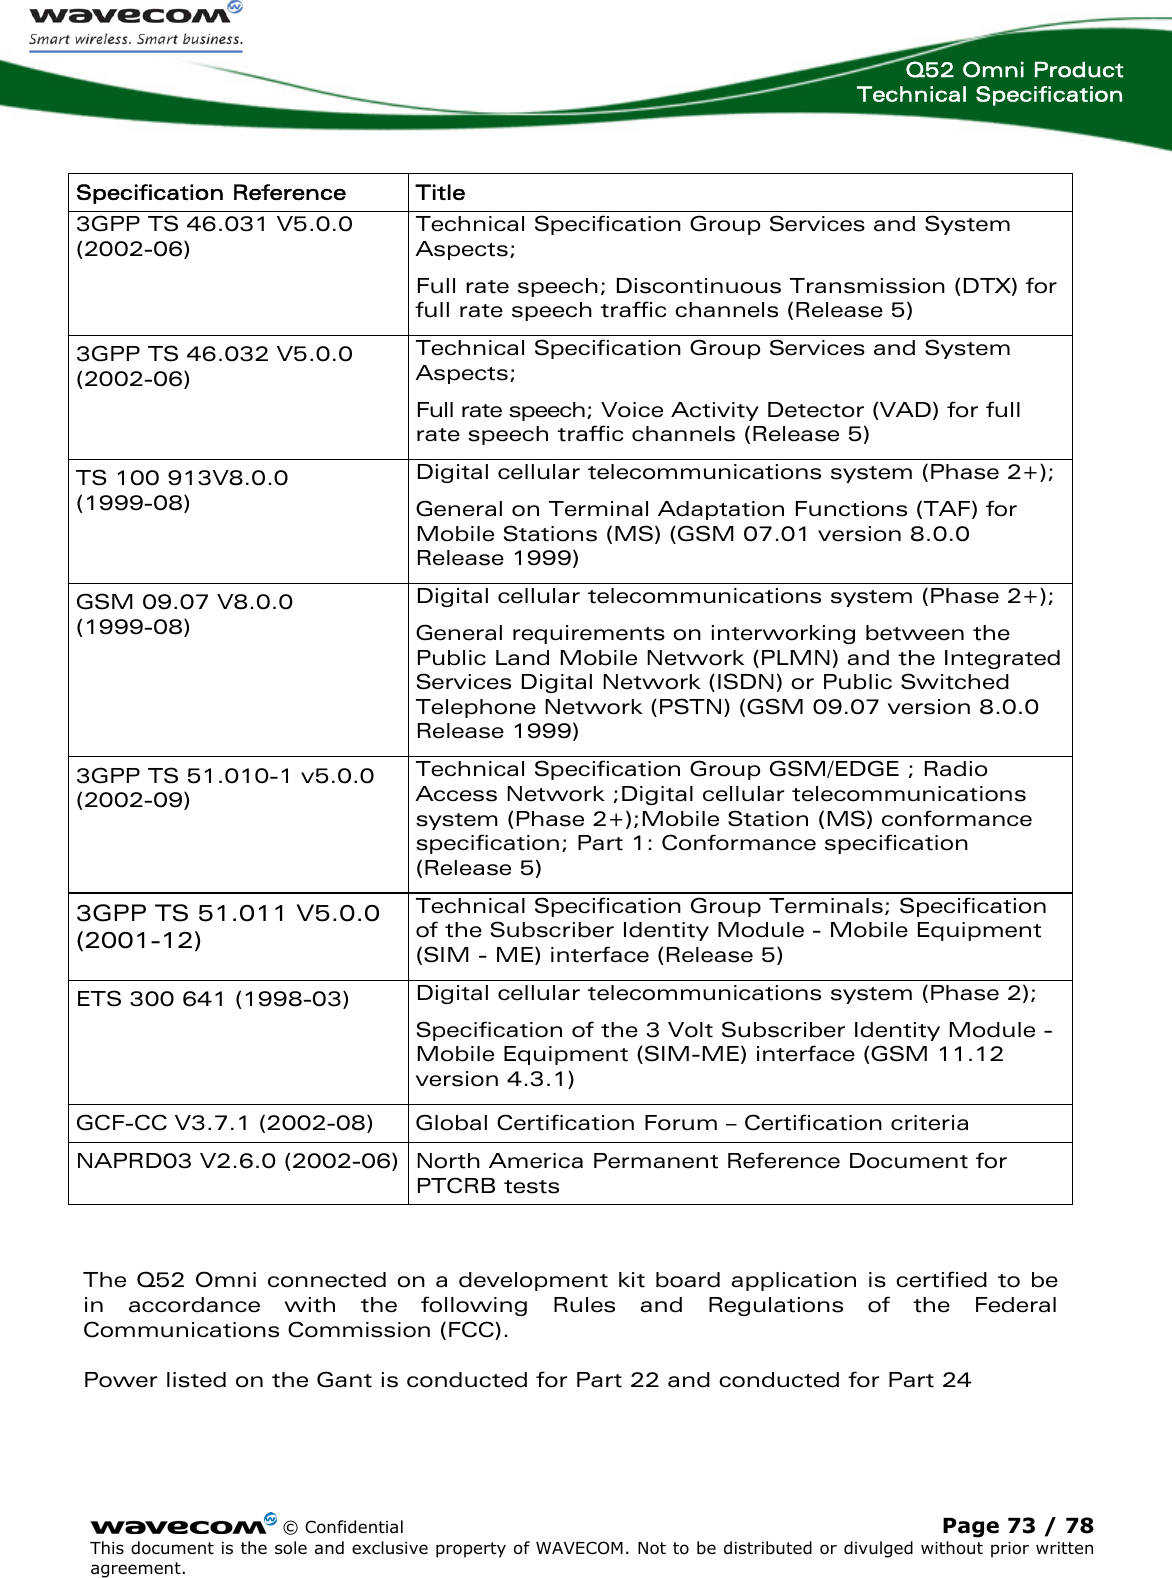  Q52 Omni Product Technical Specification    © Confidential Page 73 / 78 This document is the sole and exclusive property of WAVECOM. Not to be distributed or divulged without prior written agreement.   Specification Reference  Title 3GPP TS 46.031 V5.0.0 (2002-06) Technical Specification Group Services and System Aspects; Full rate speech; Discontinuous Transmission (DTX) for full rate speech traffic channels (Release 5) 3GPP TS 46.032 V5.0.0 (2002-06) Technical Specification Group Services and System Aspects; Full rate speech; Voice Activity Detector (VAD) for full rate speech traffic channels (Release 5) TS 100 913V8.0.0  (1999-08) Digital cellular telecommunications system (Phase 2+); General on Terminal Adaptation Functions (TAF) for Mobile Stations (MS) (GSM 07.01 version 8.0.0 Release 1999) GSM 09.07 V8.0.0  (1999-08) Digital cellular telecommunications system (Phase 2+); General requirements on interworking between the Public Land Mobile Network (PLMN) and the Integrated Services Digital Network (ISDN) or Public Switched Telephone Network (PSTN) (GSM 09.07 version 8.0.0 Release 1999) 3GPP TS 51.010-1 v5.0.0 (2002-09) Technical Specification Group GSM/EDGE ; Radio Access Network ;Digital cellular telecommunications system (Phase 2+);Mobile Station (MS) conformance specification; Part 1: Conformance specification (Release 5) 3GPP TS 51.011 V5.0.0 (2001-12) Technical Specification Group Terminals; Specification of the Subscriber Identity Module - Mobile Equipment (SIM - ME) interface (Release 5) ETS 300 641 (1998-03)  Digital cellular telecommunications system (Phase 2); Specification of the 3 Volt Subscriber Identity Module - Mobile Equipment (SIM-ME) interface (GSM 11.12 version 4.3.1) GCF-CC V3.7.1 (2002-08)  Global Certification Forum – Certification criteria  NAPRD03 V2.6.0 (2002-06)  North America Permanent Reference Document for PTCRB tests  The Q52 Omni connected on a development kit board application is certified to be in accordance with the following Rules and Regulations of the Federal Communications Commission (FCC).   Power listed on the Gant is conducted for Part 22 and conducted for Part 24   